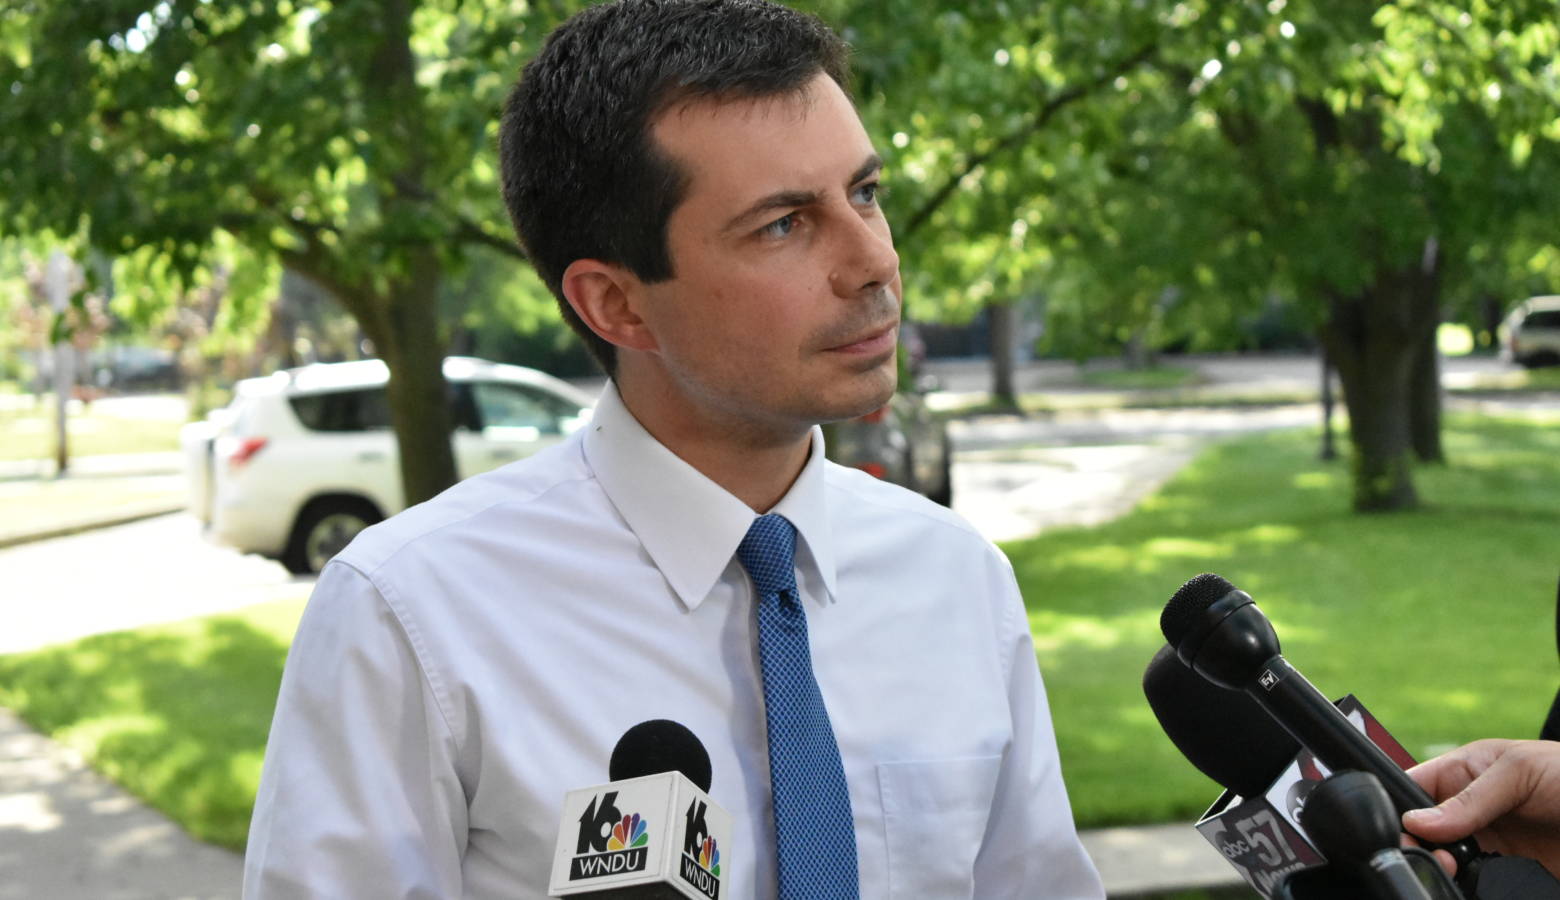 South Bend Mayor Pete Buttigieg speaks to reporters about his presidential campaign outside of a July 1, 2019 press conference about community policing efforts. (Justin Hicks/IPB News)